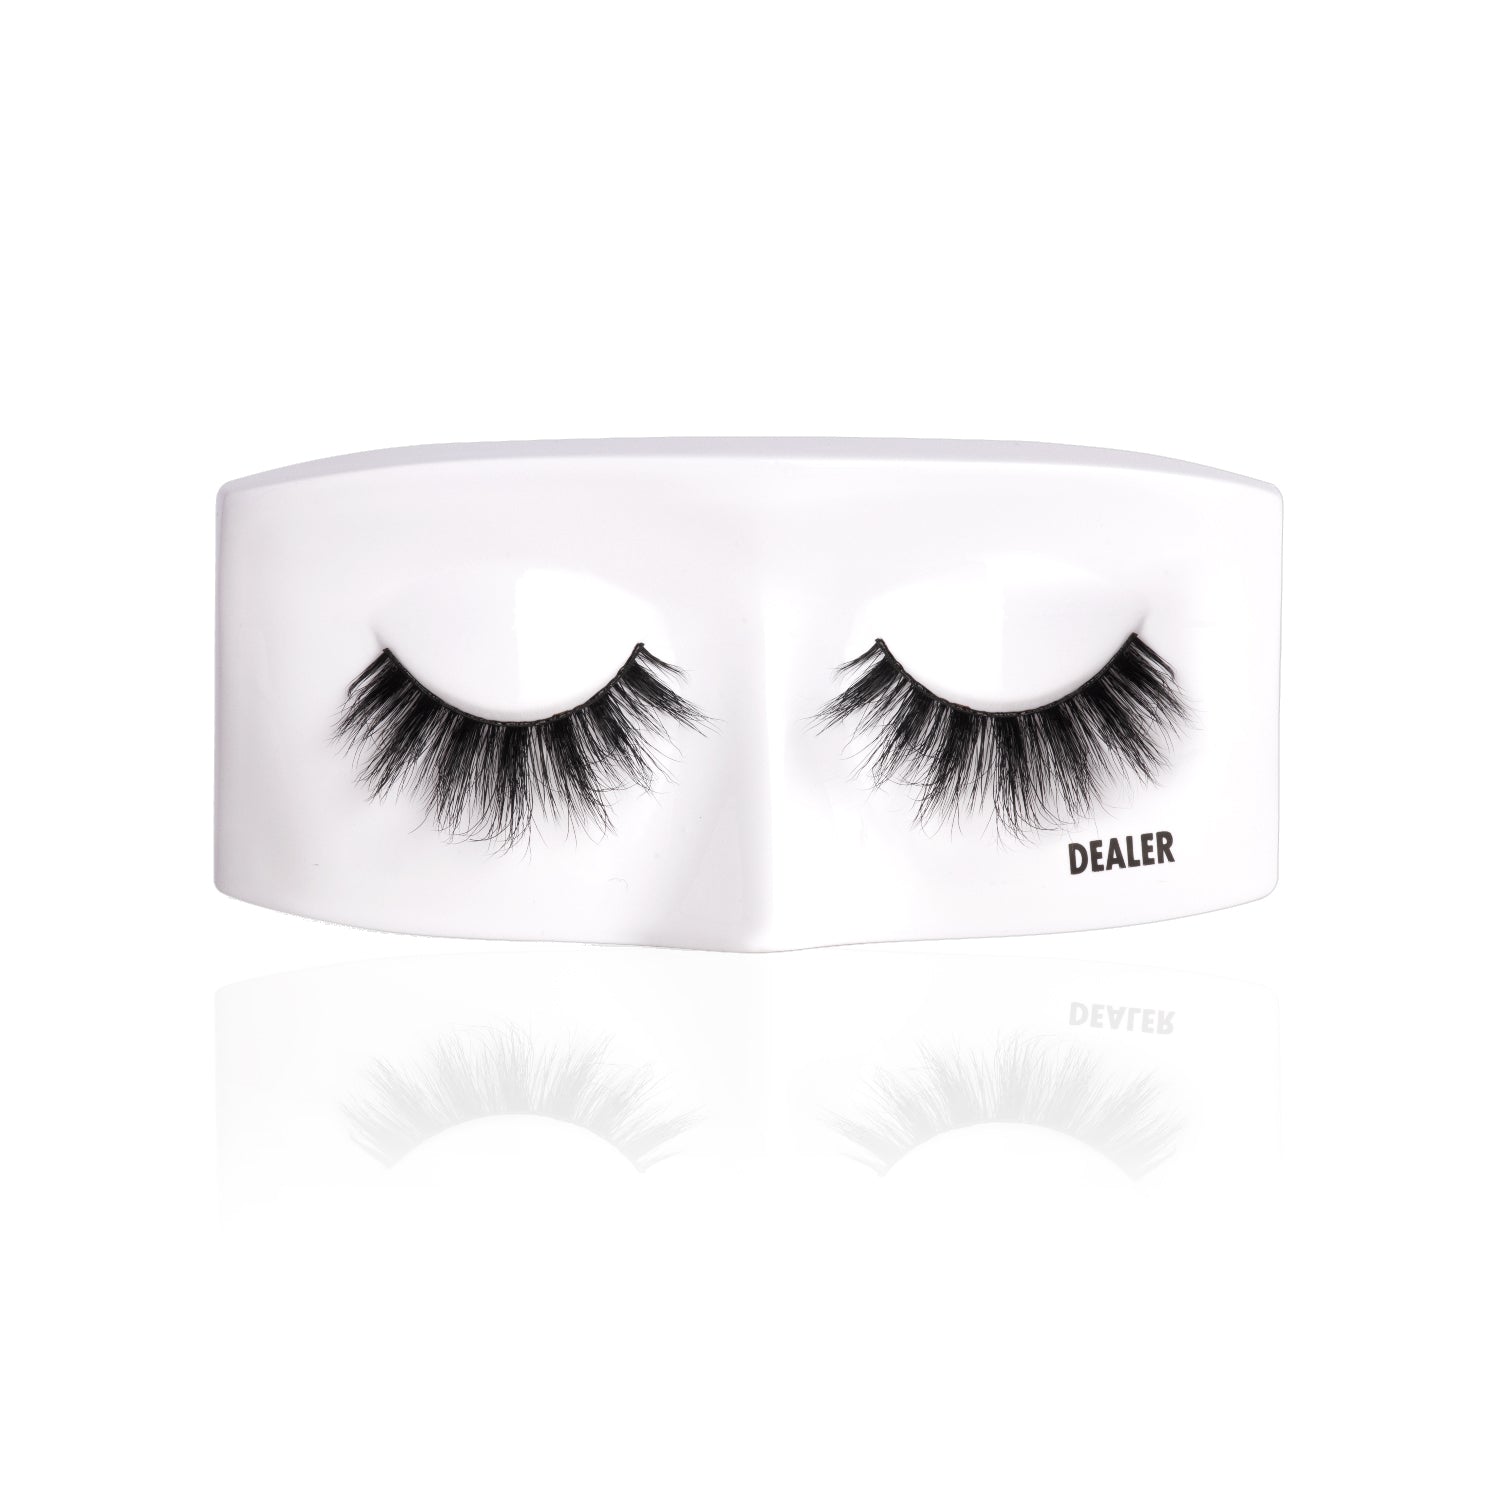 PAC Cosmetics Ace of Lashes (1 Pair) #Color_Dealer